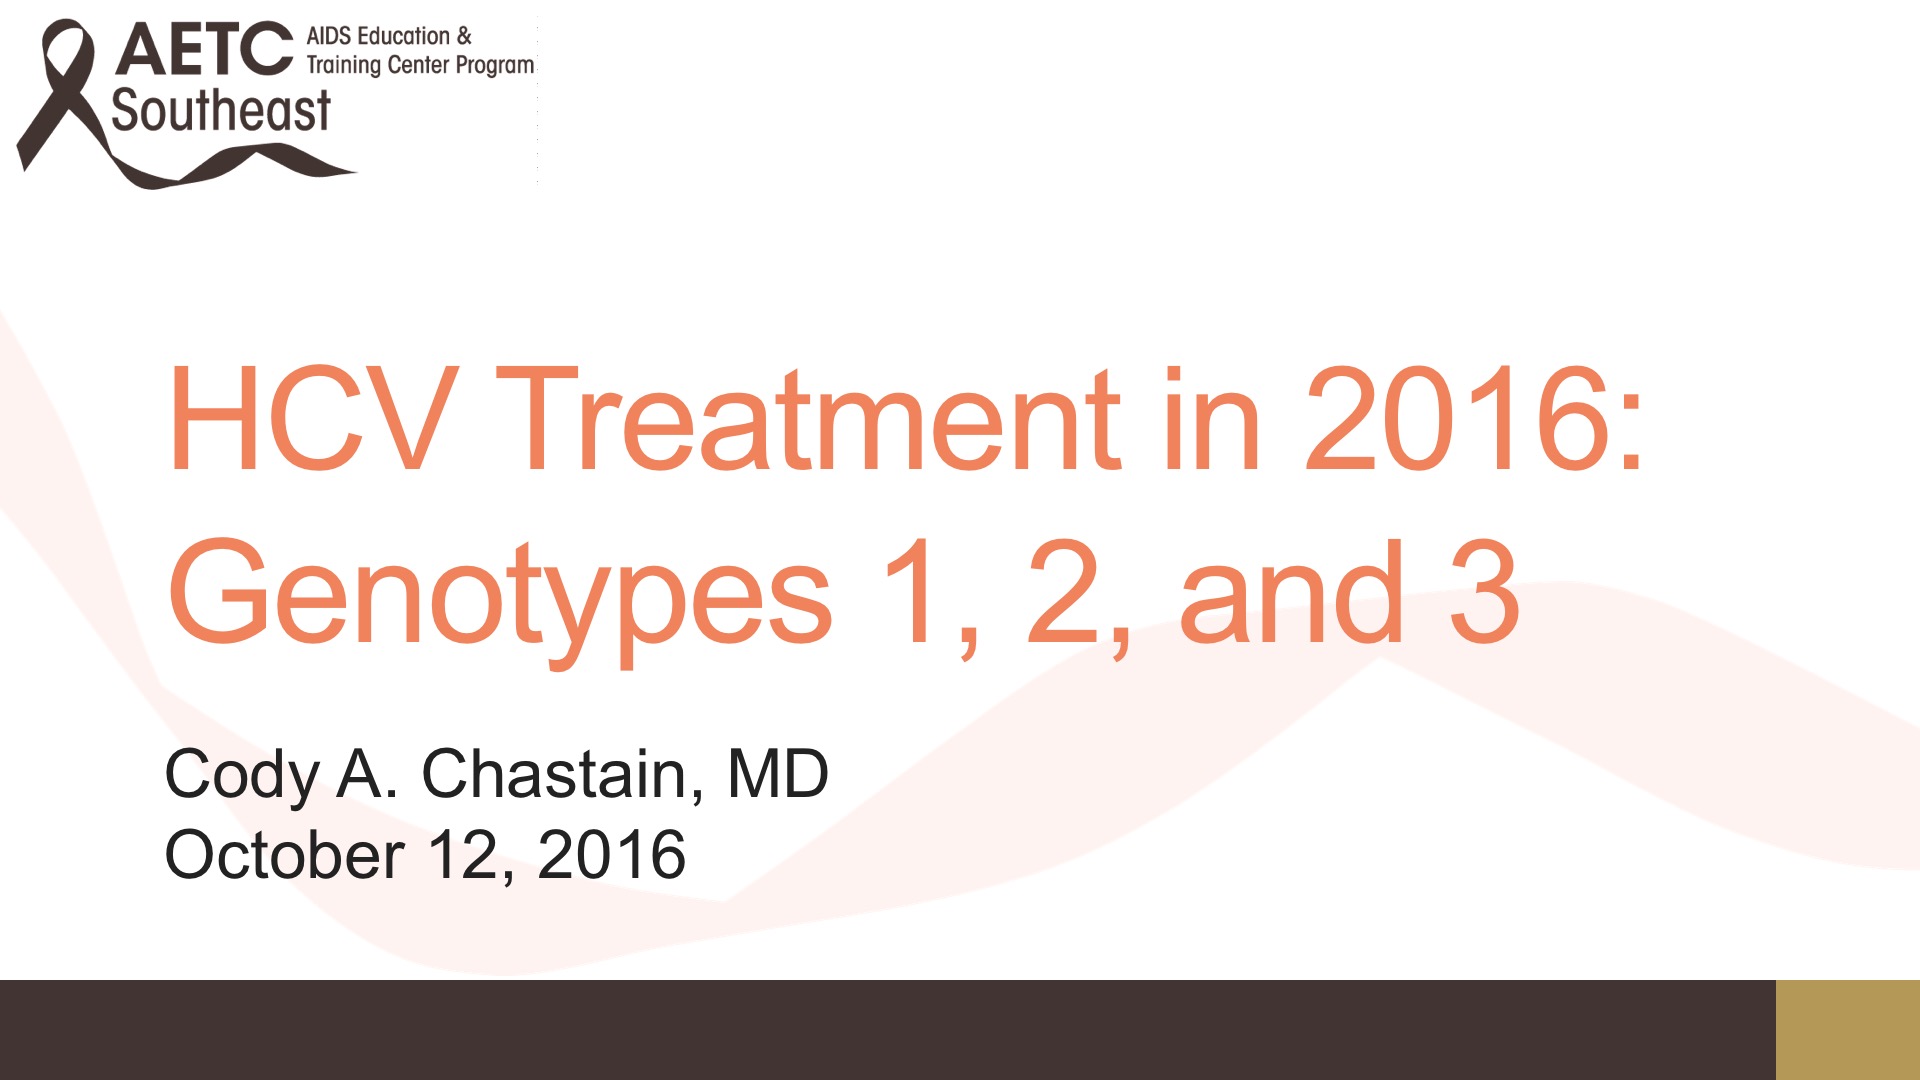 HCV Treatment in 2016: Genotypes 1, 2, and 3